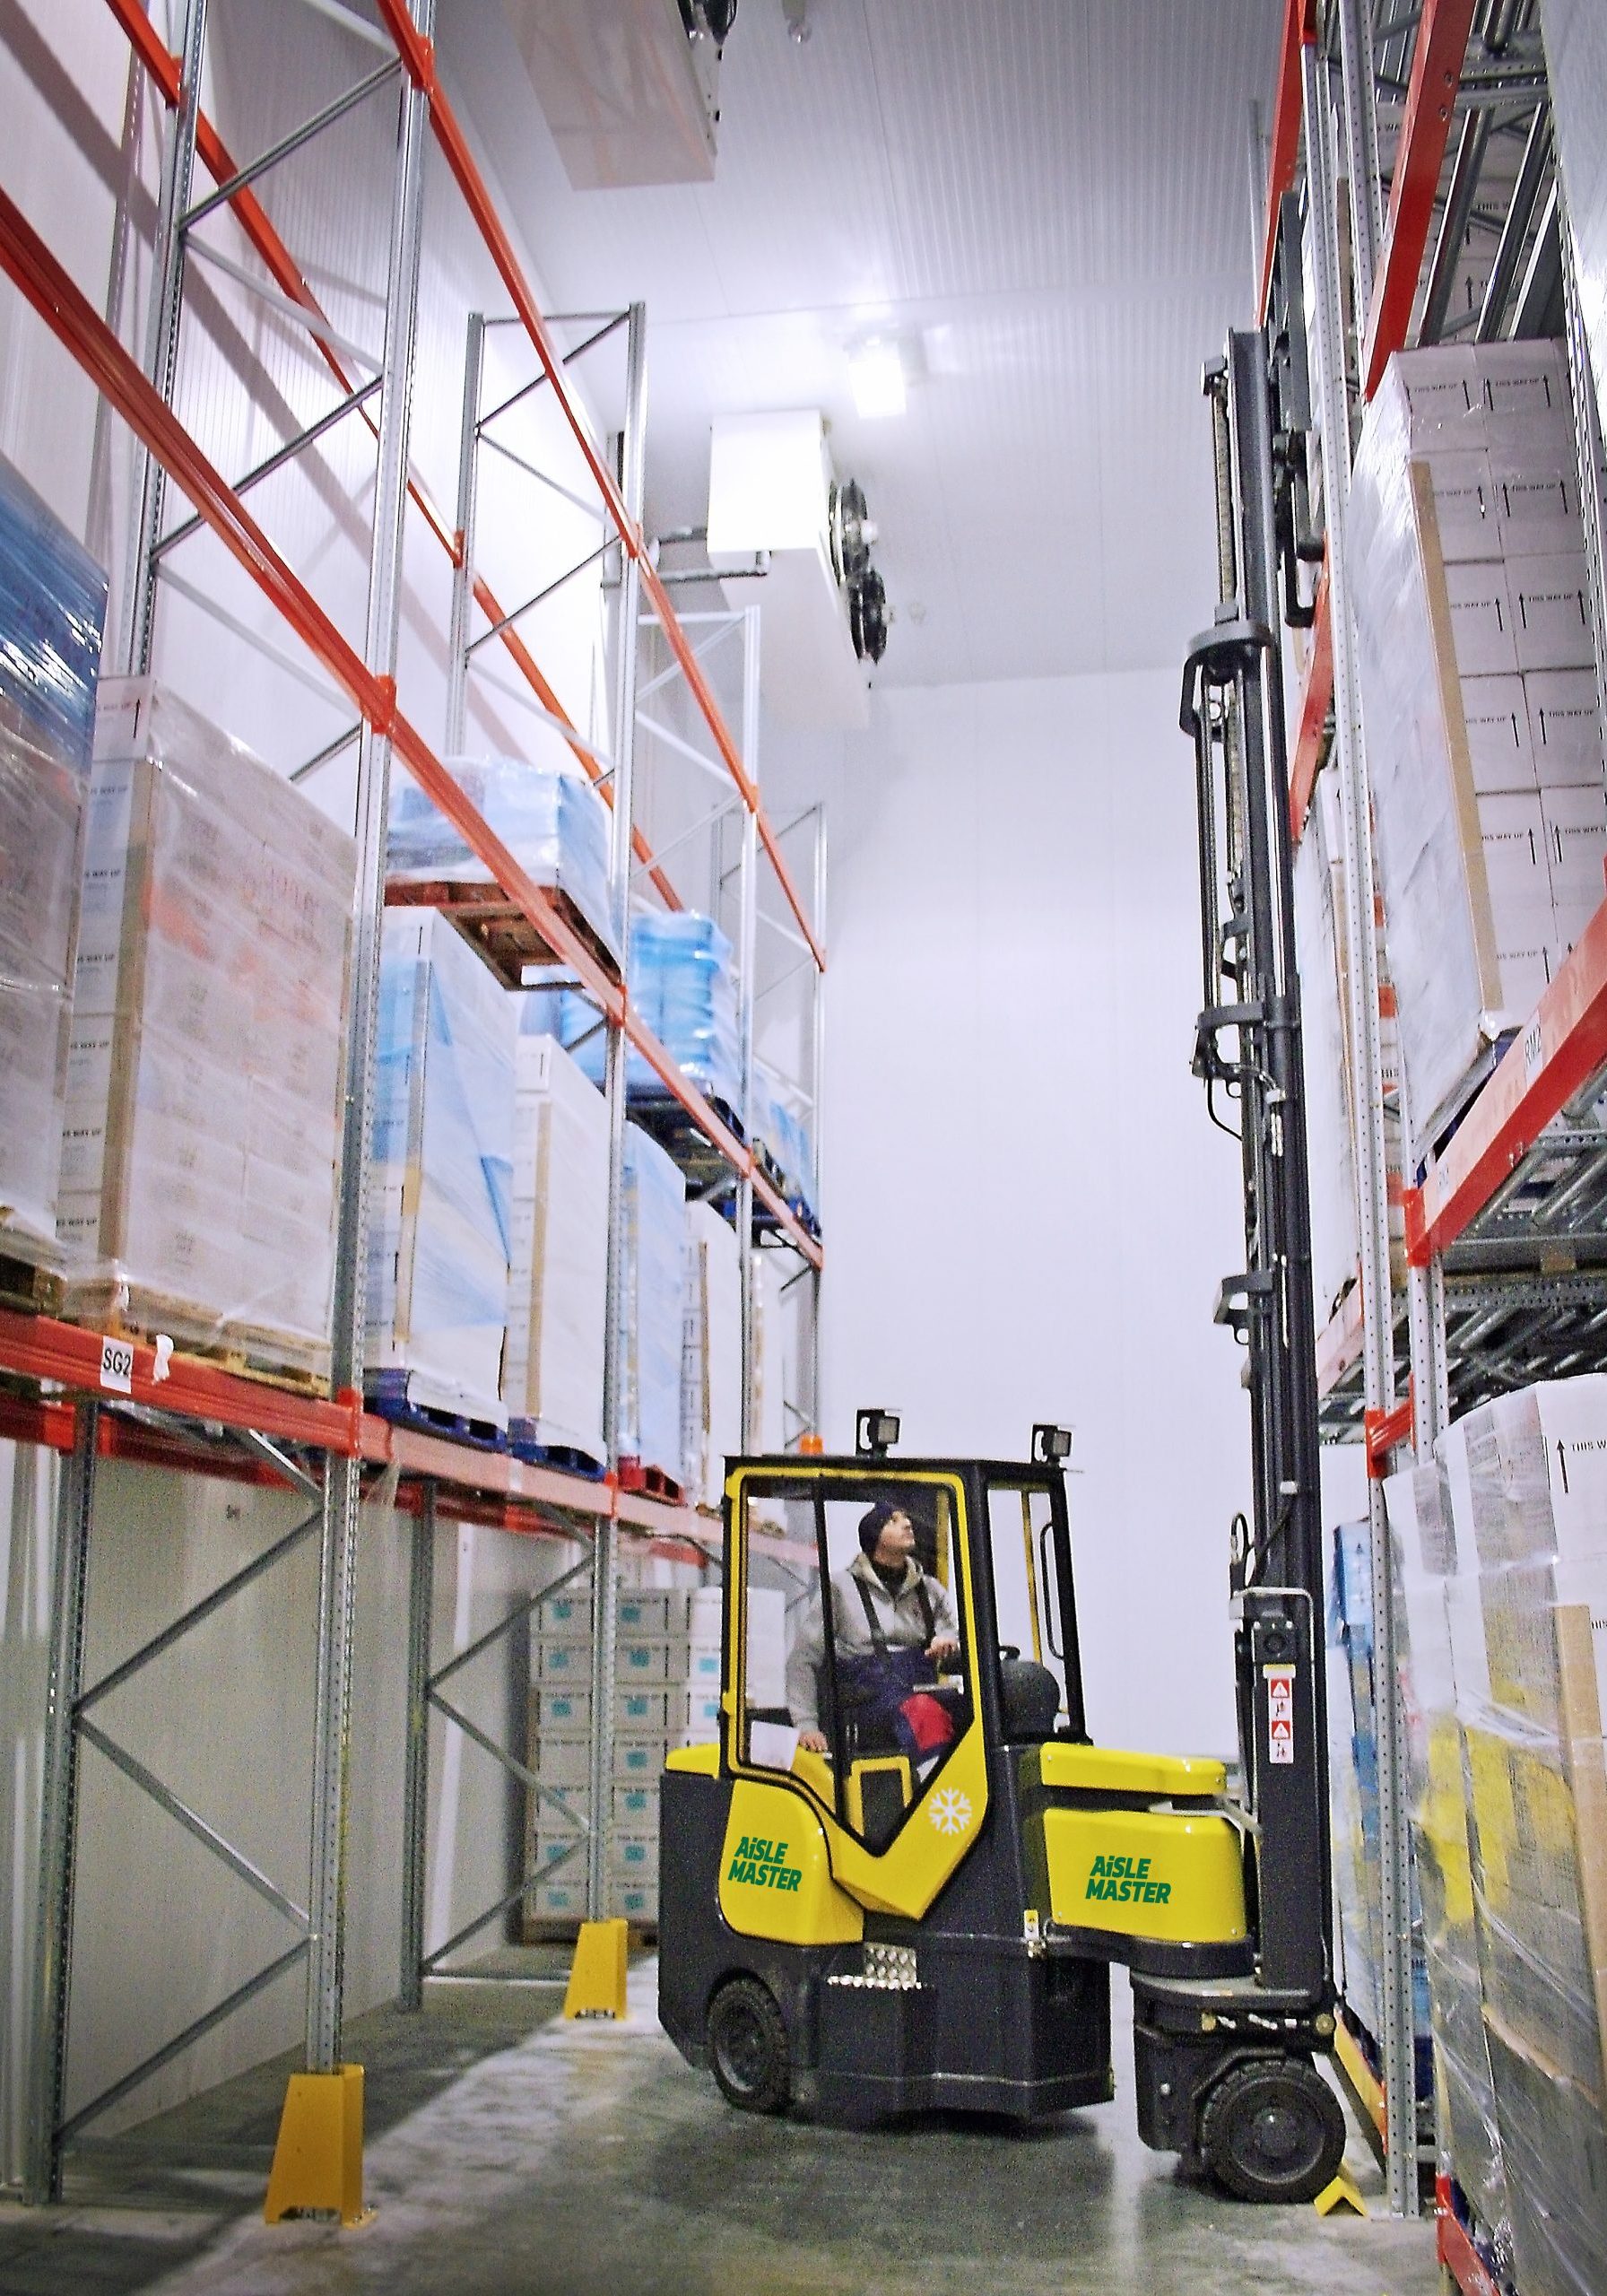 Articulated VNA Combilift Aislemaster Electric Forklift in use